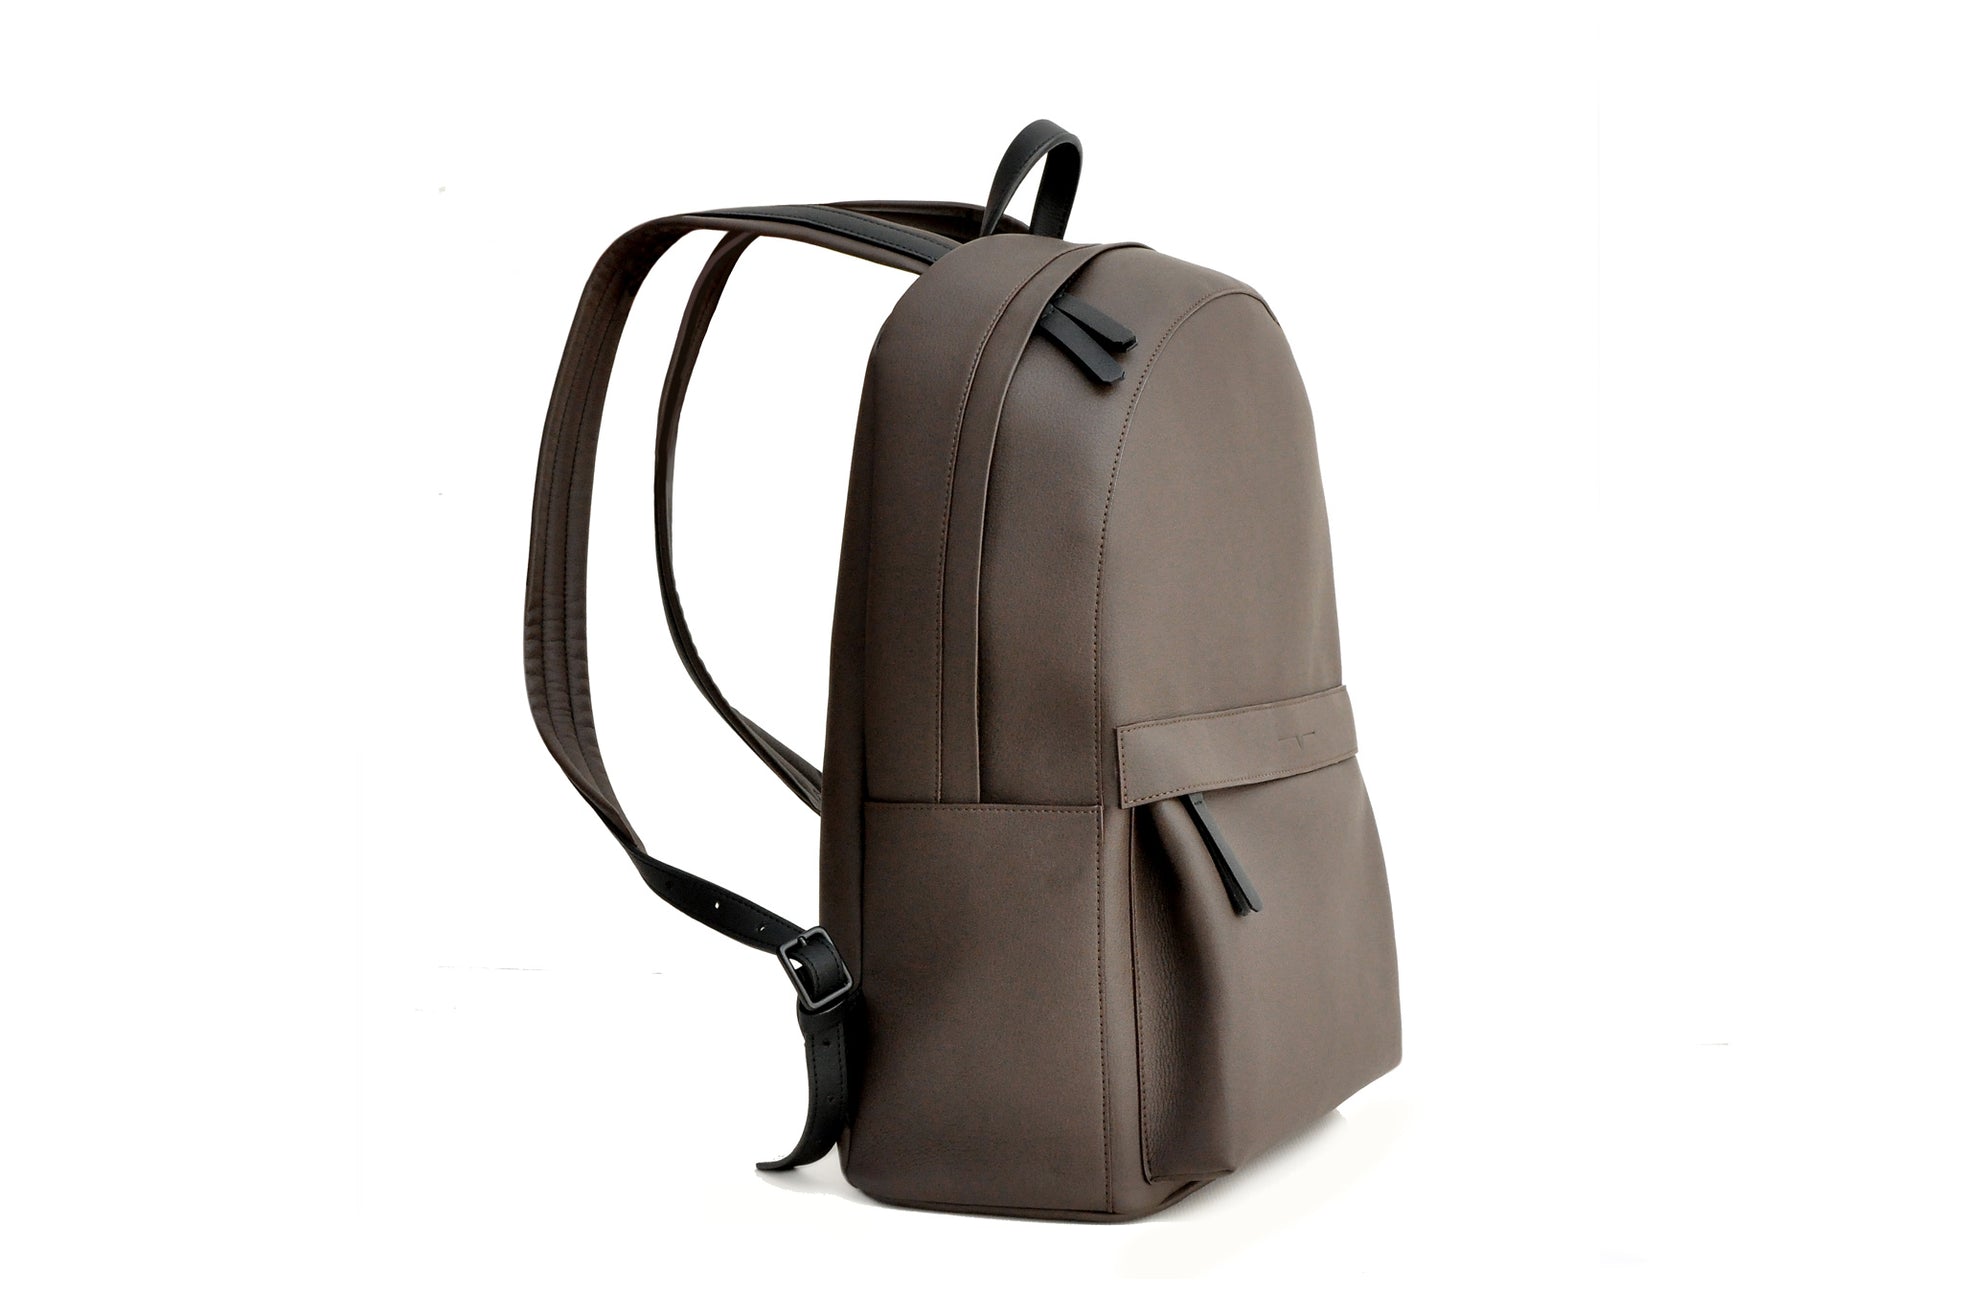 The Classic Backpack in Technik in Taupe and Black image 3